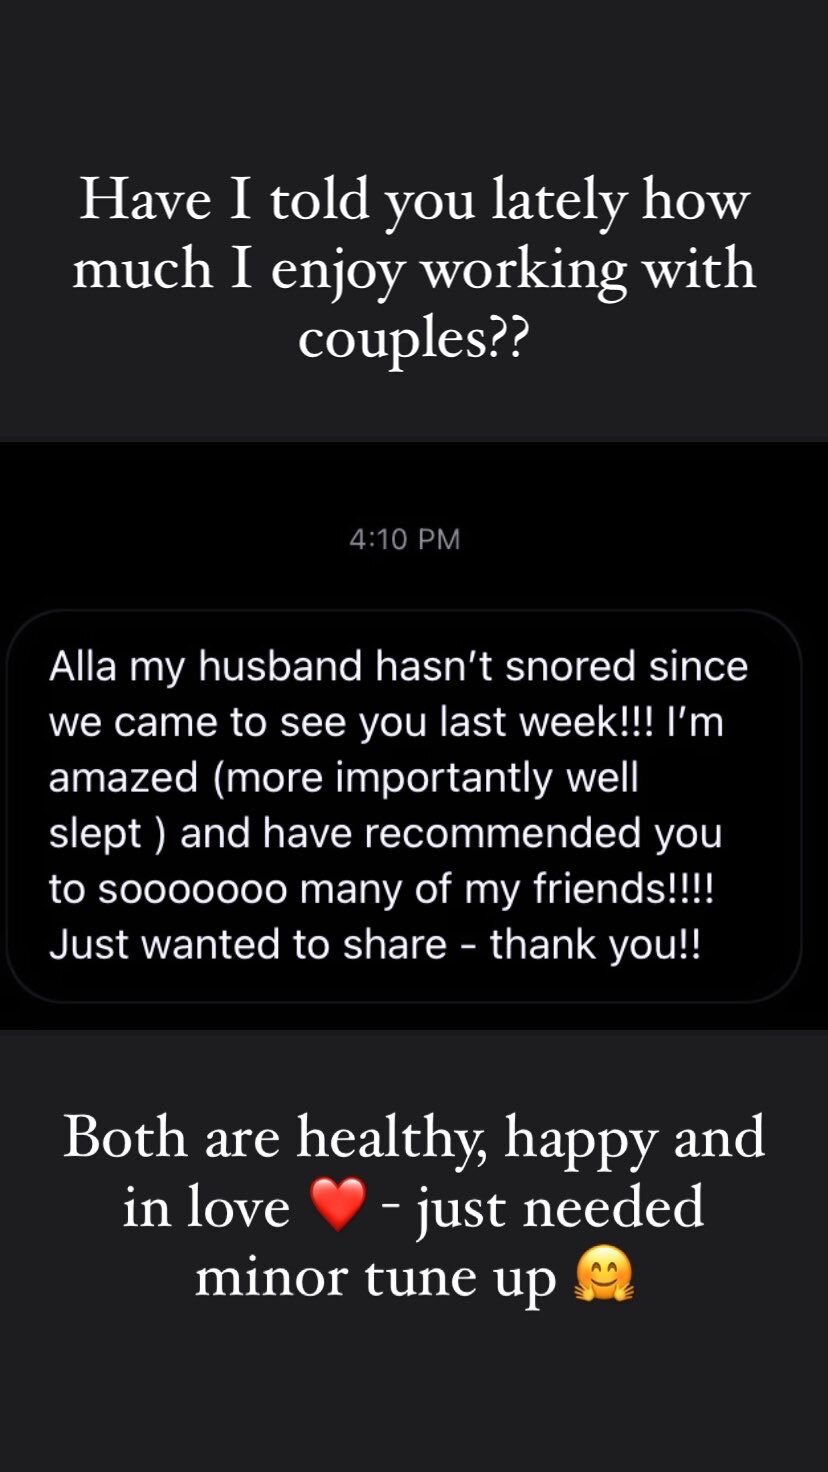  SuJok acupuncture treatment based in Vancouver at Alla Ozerova Acupuncture Clinic used as alternative to couples therapy. Patient expresses gratitude since her husband stopped snoring after a few treatments.  